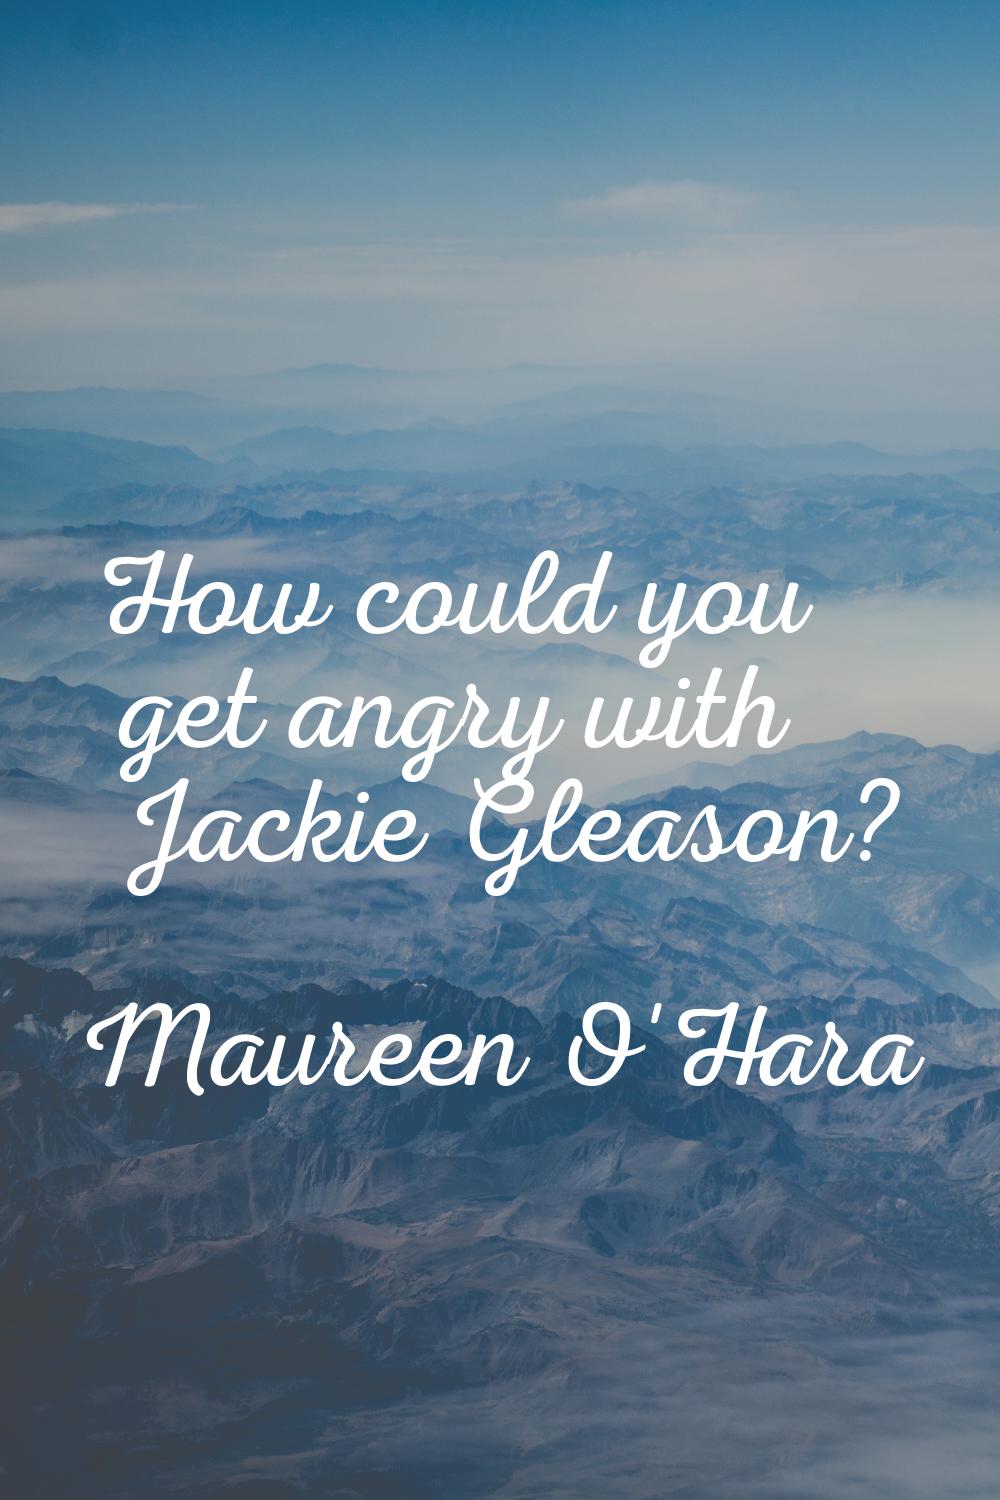 How could you get angry with Jackie Gleason?